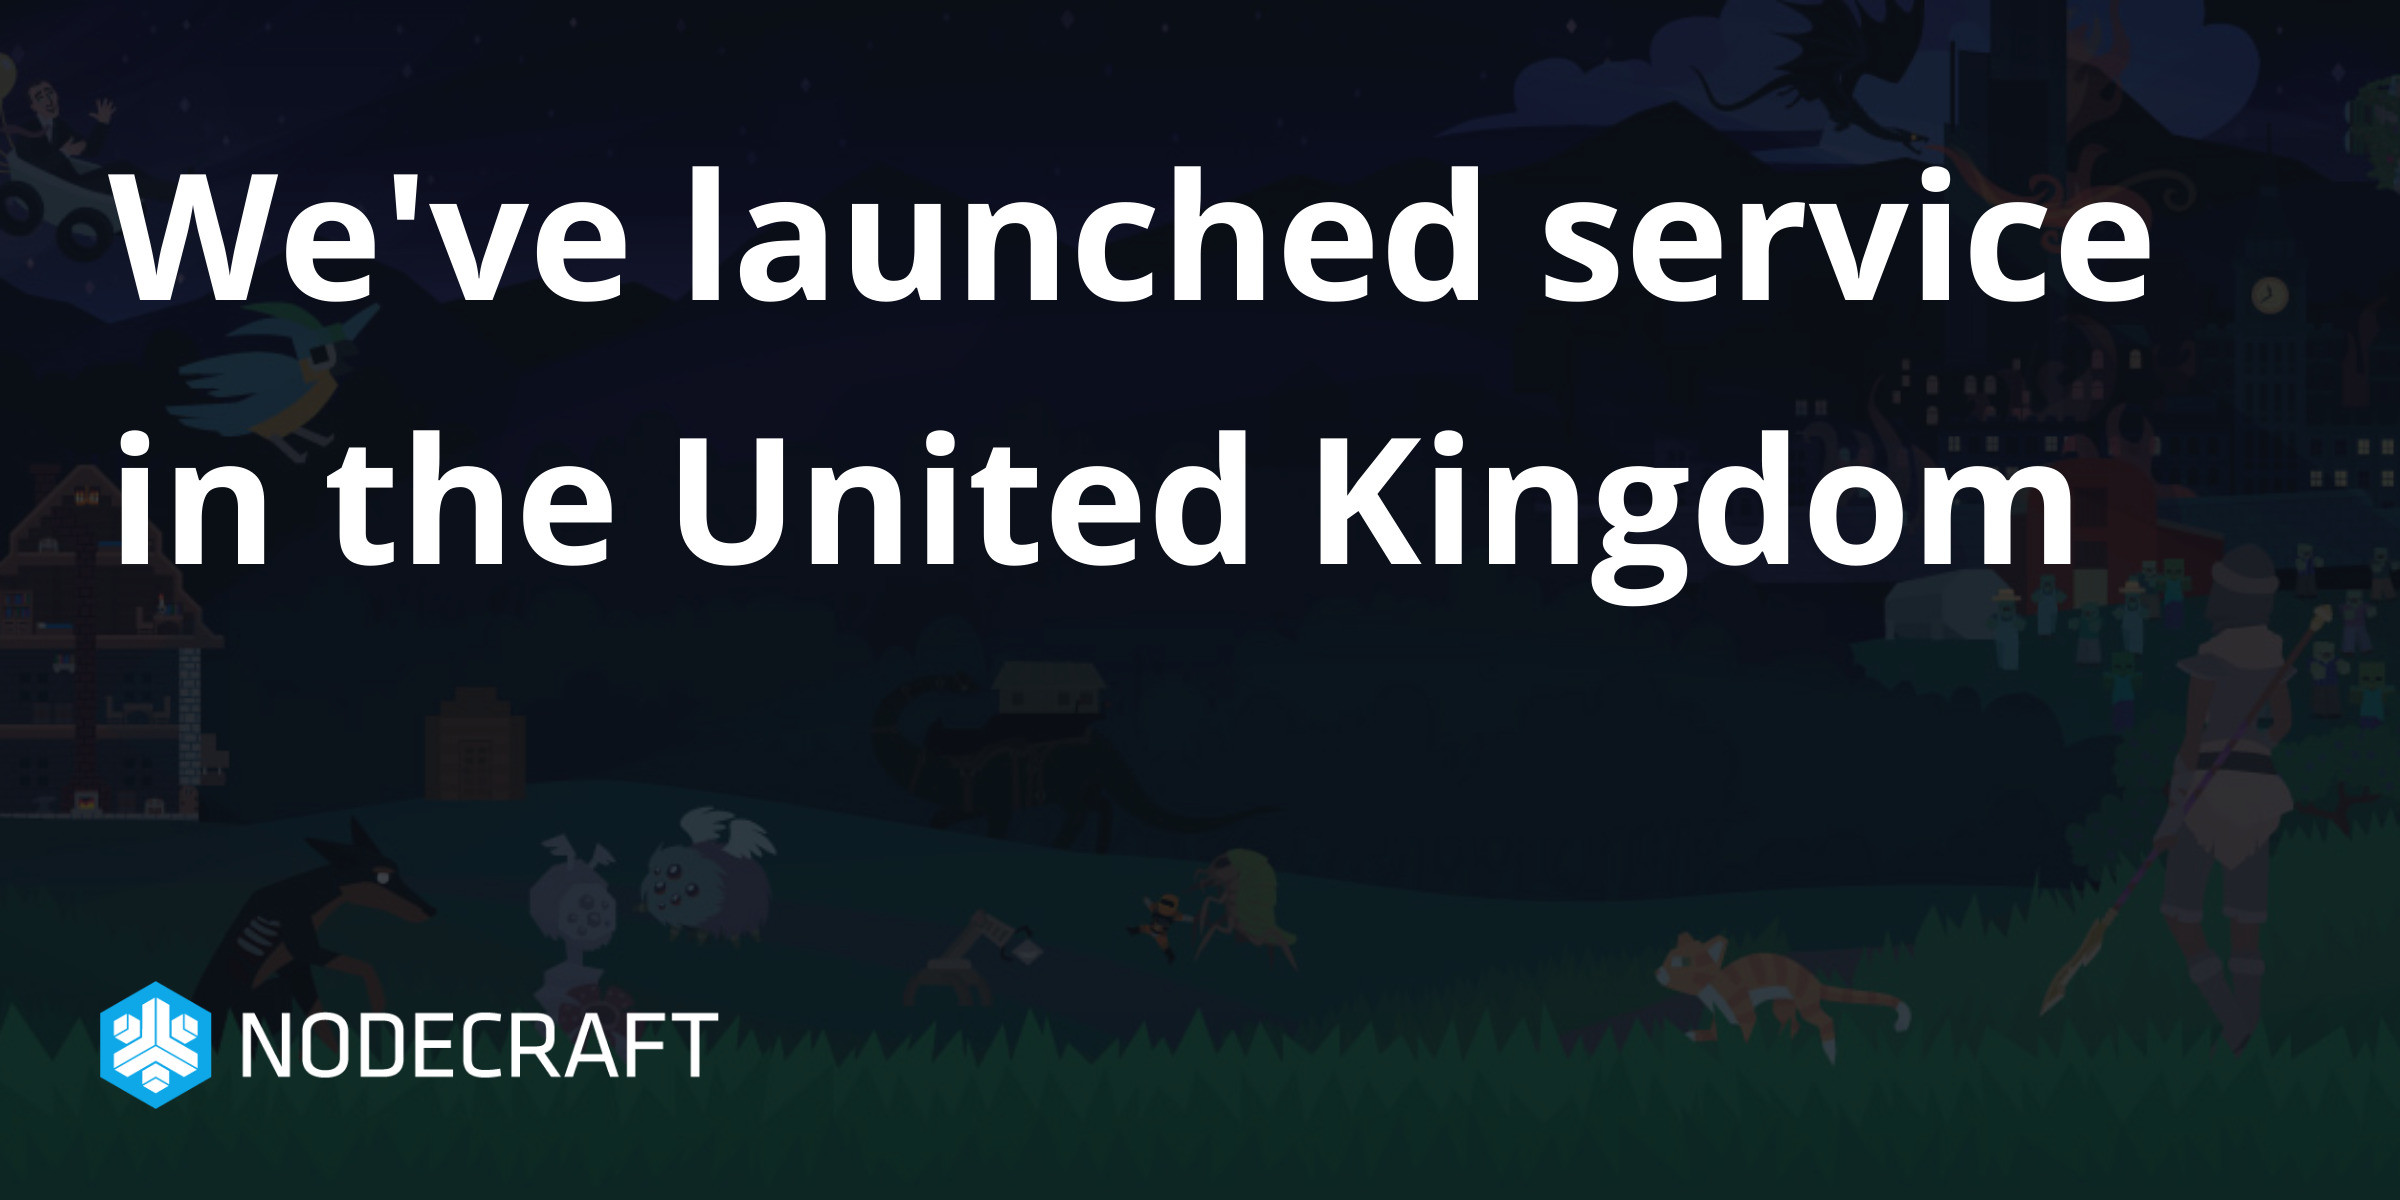 We've launched service in the United Kingdom